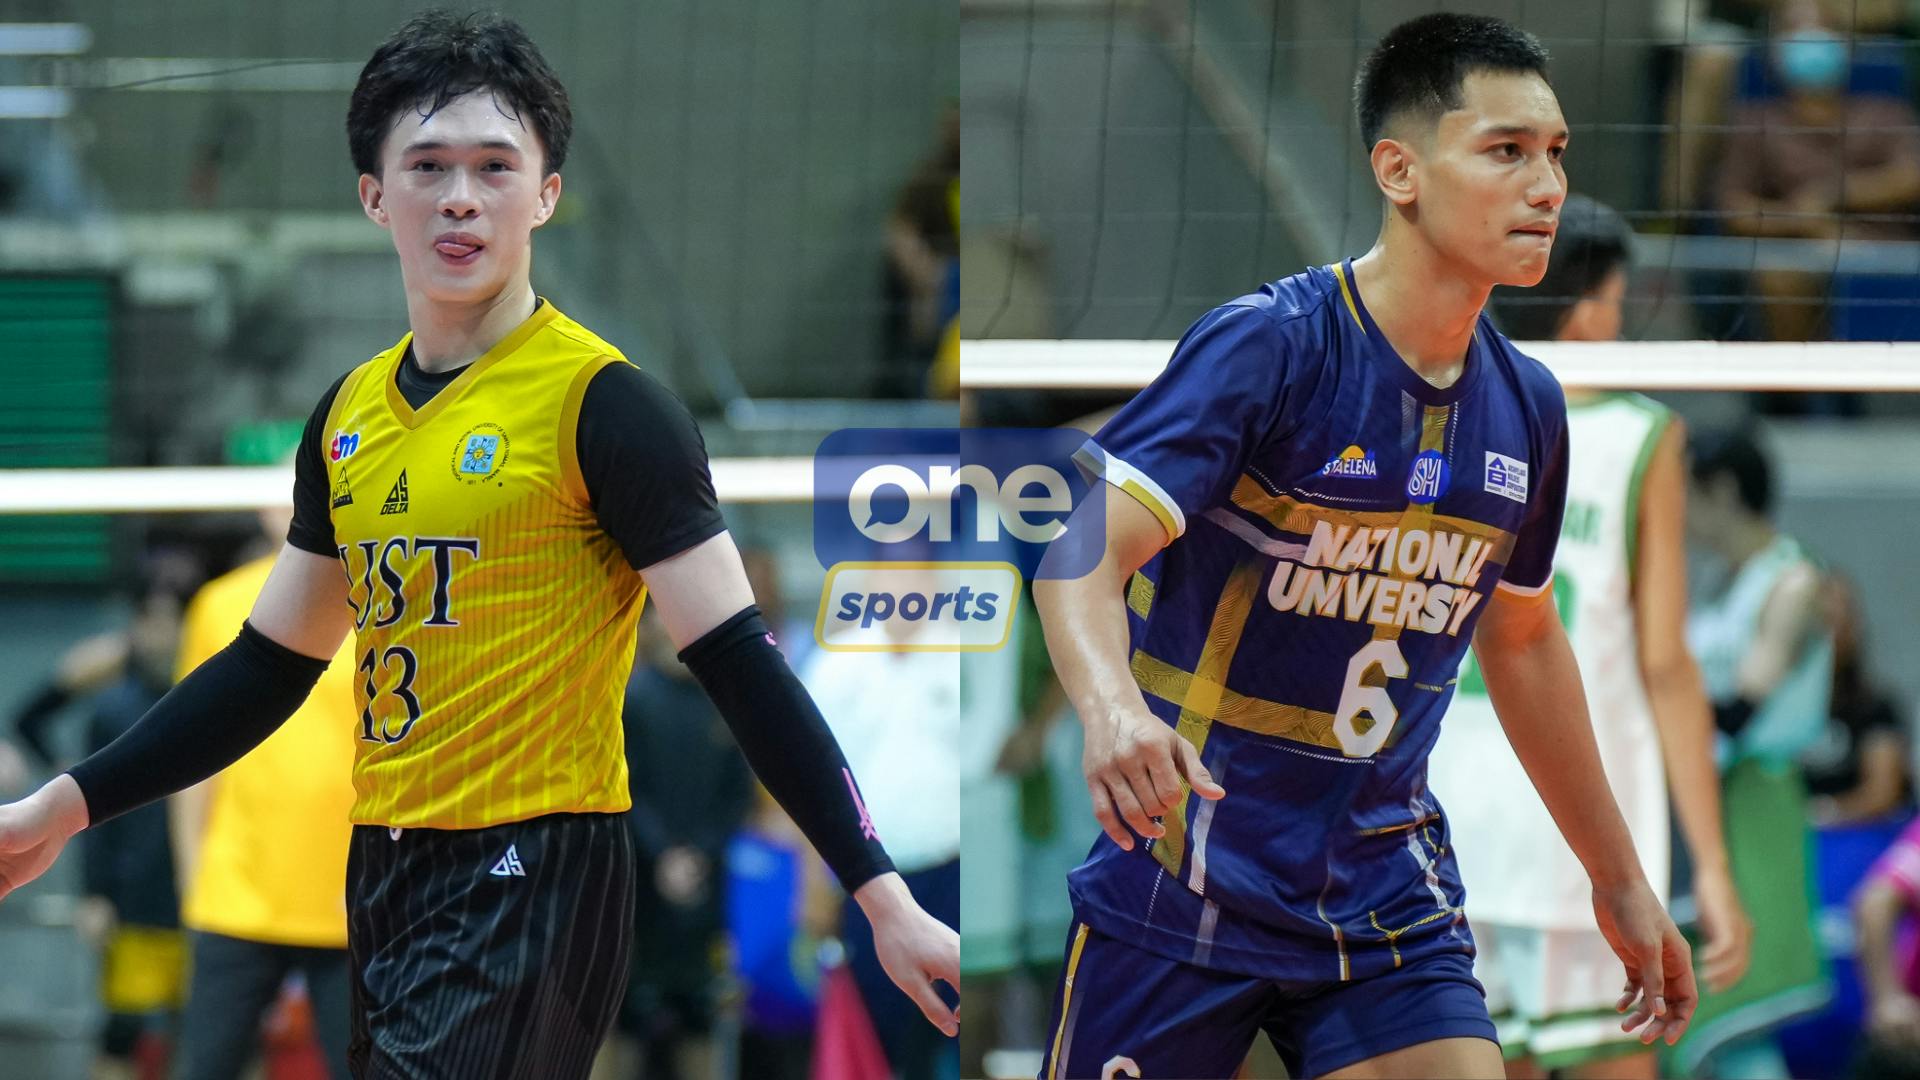 UAAP Finals schedule: Through a wild and historic Season 86, NU and UST fight for men